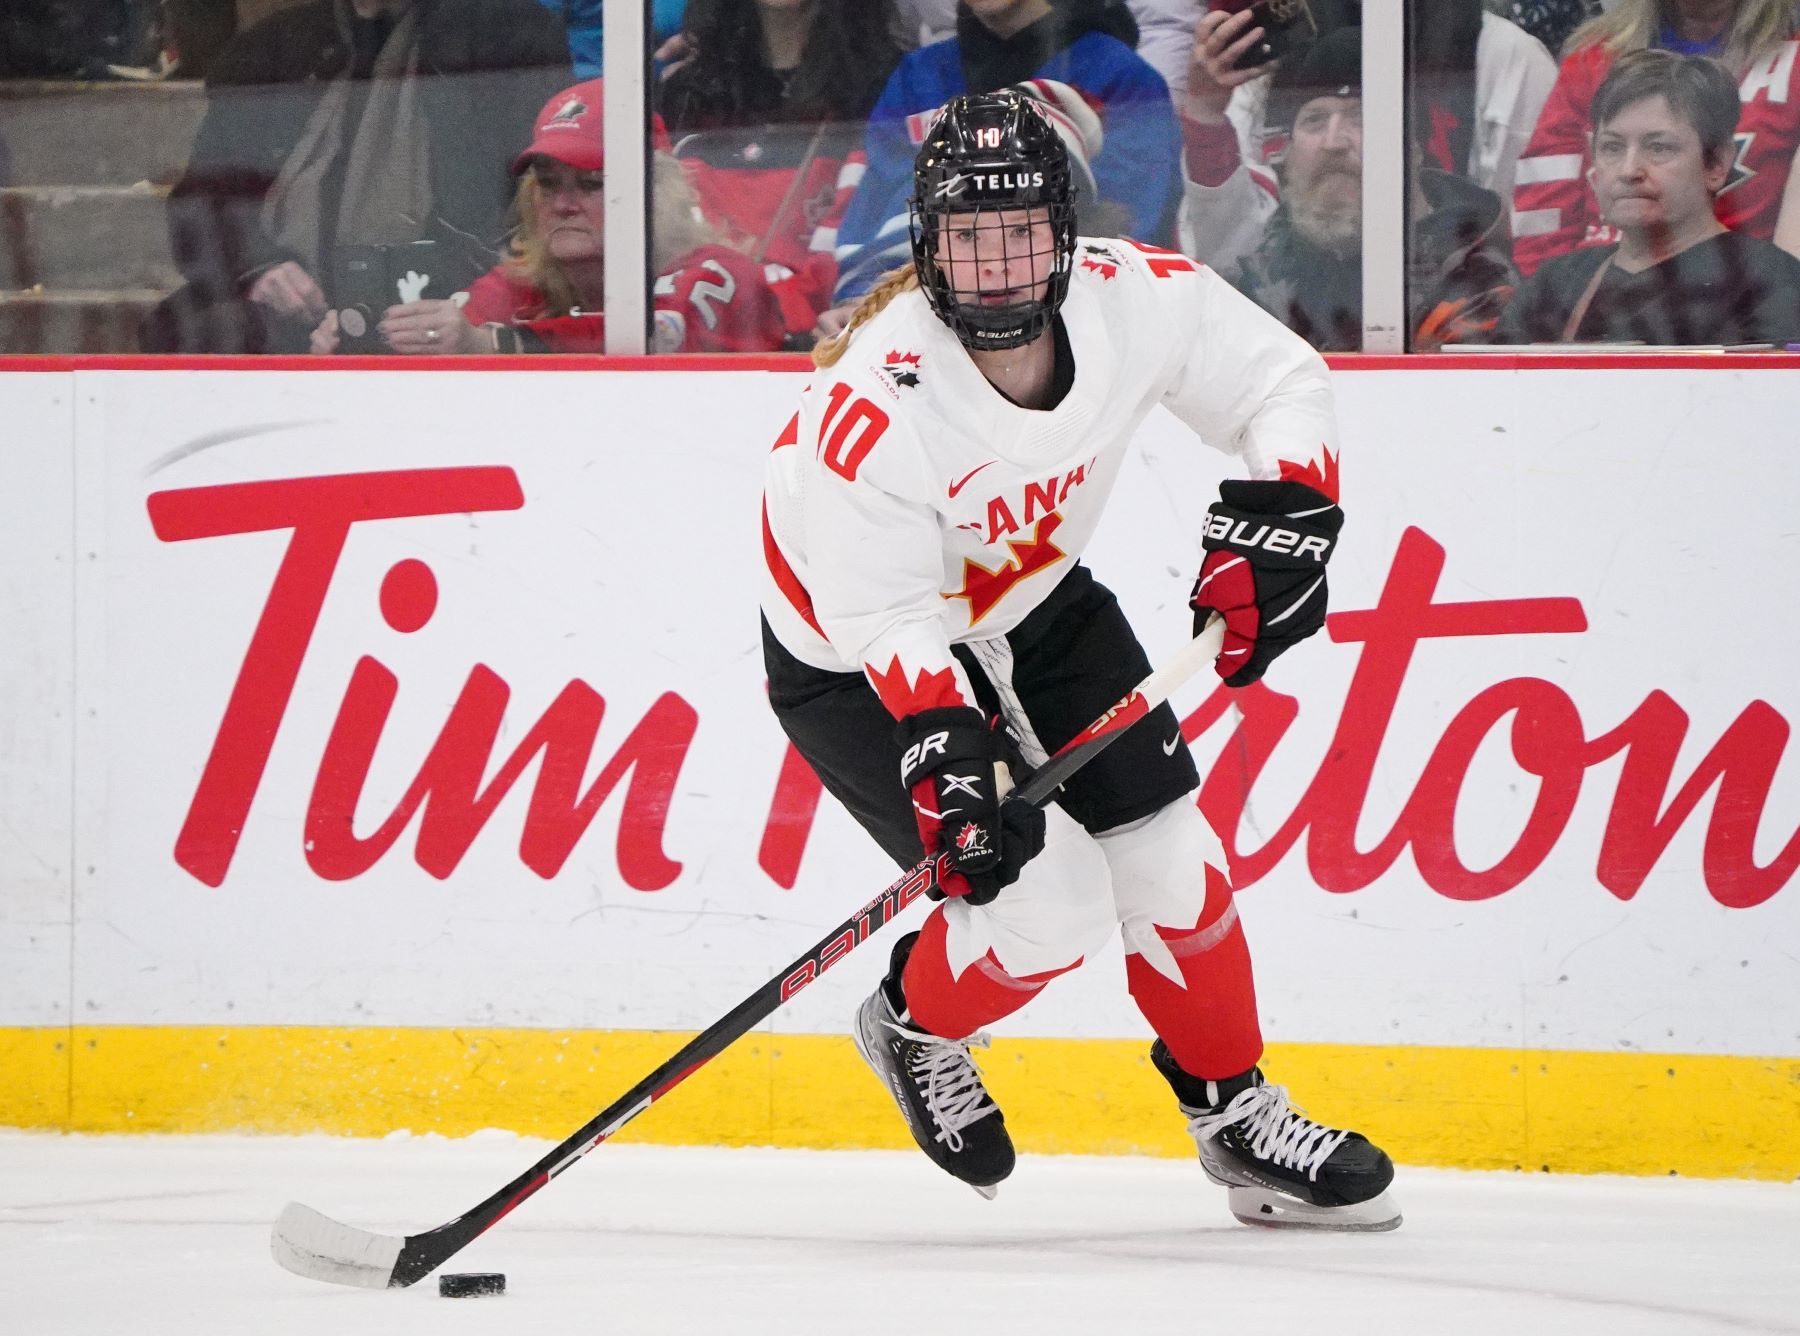 IIHF - Finalists Named for Female Player of the Year